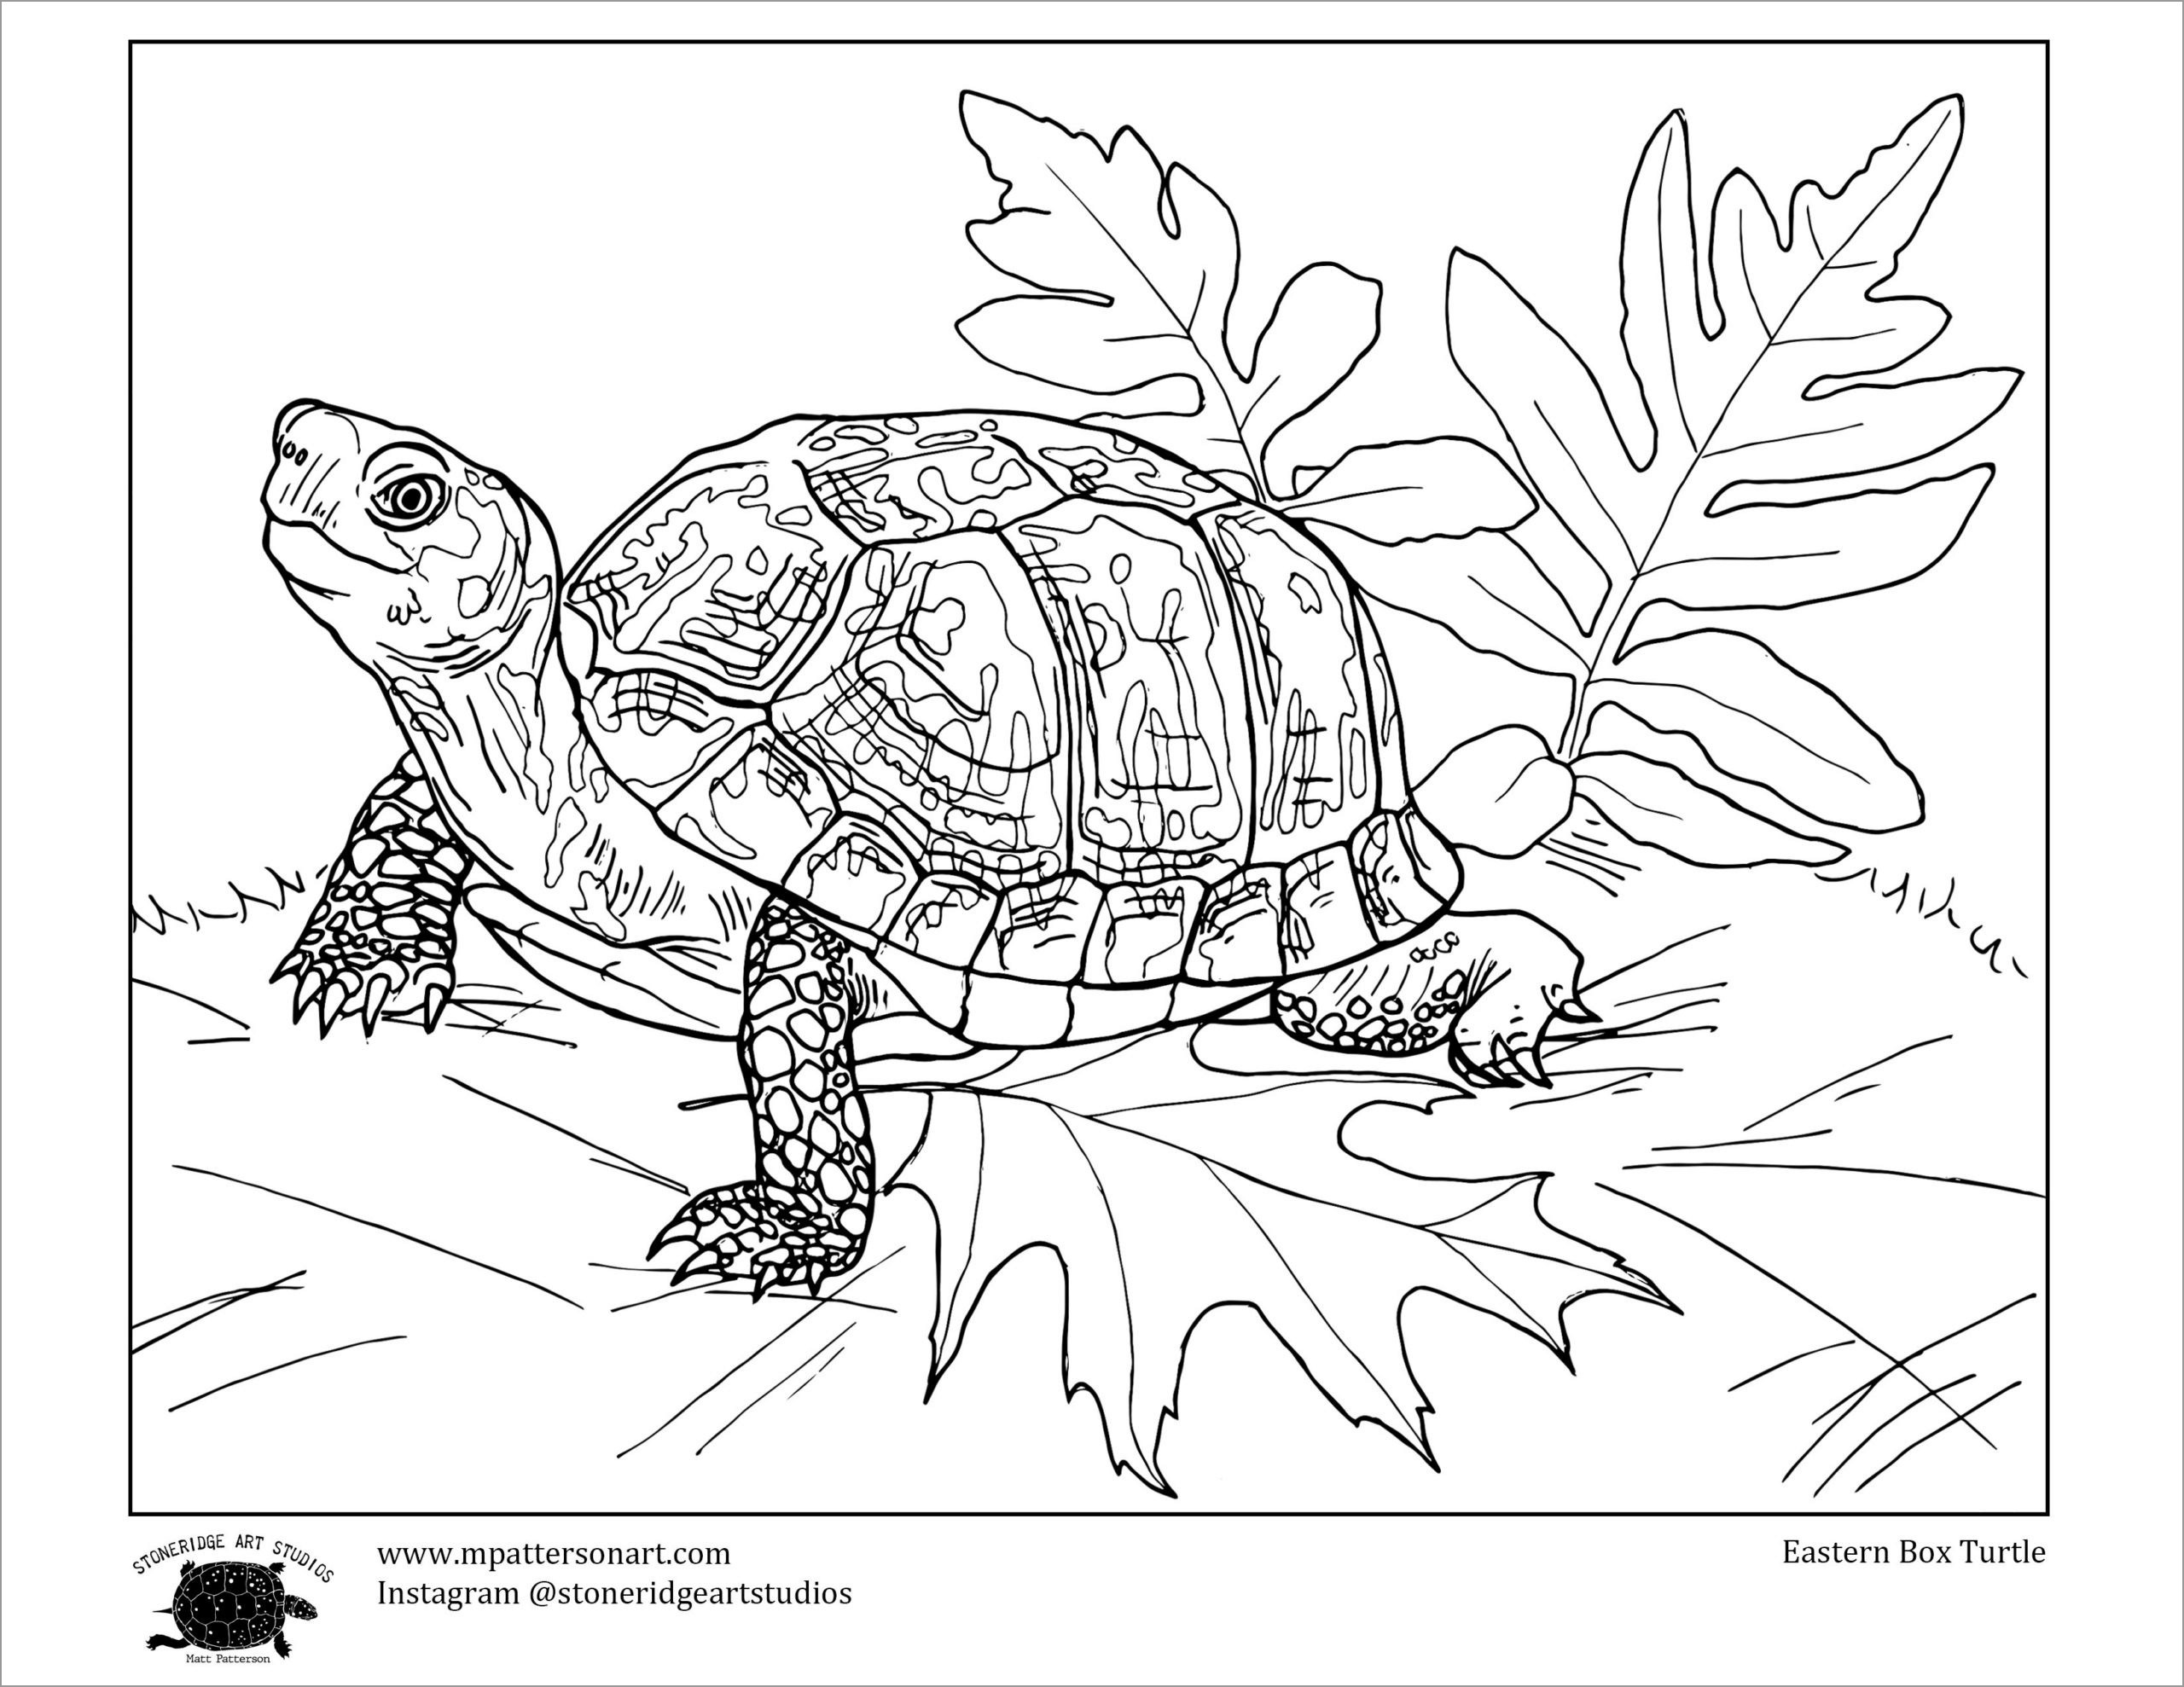 Eastern Box Turtle Coloring Page